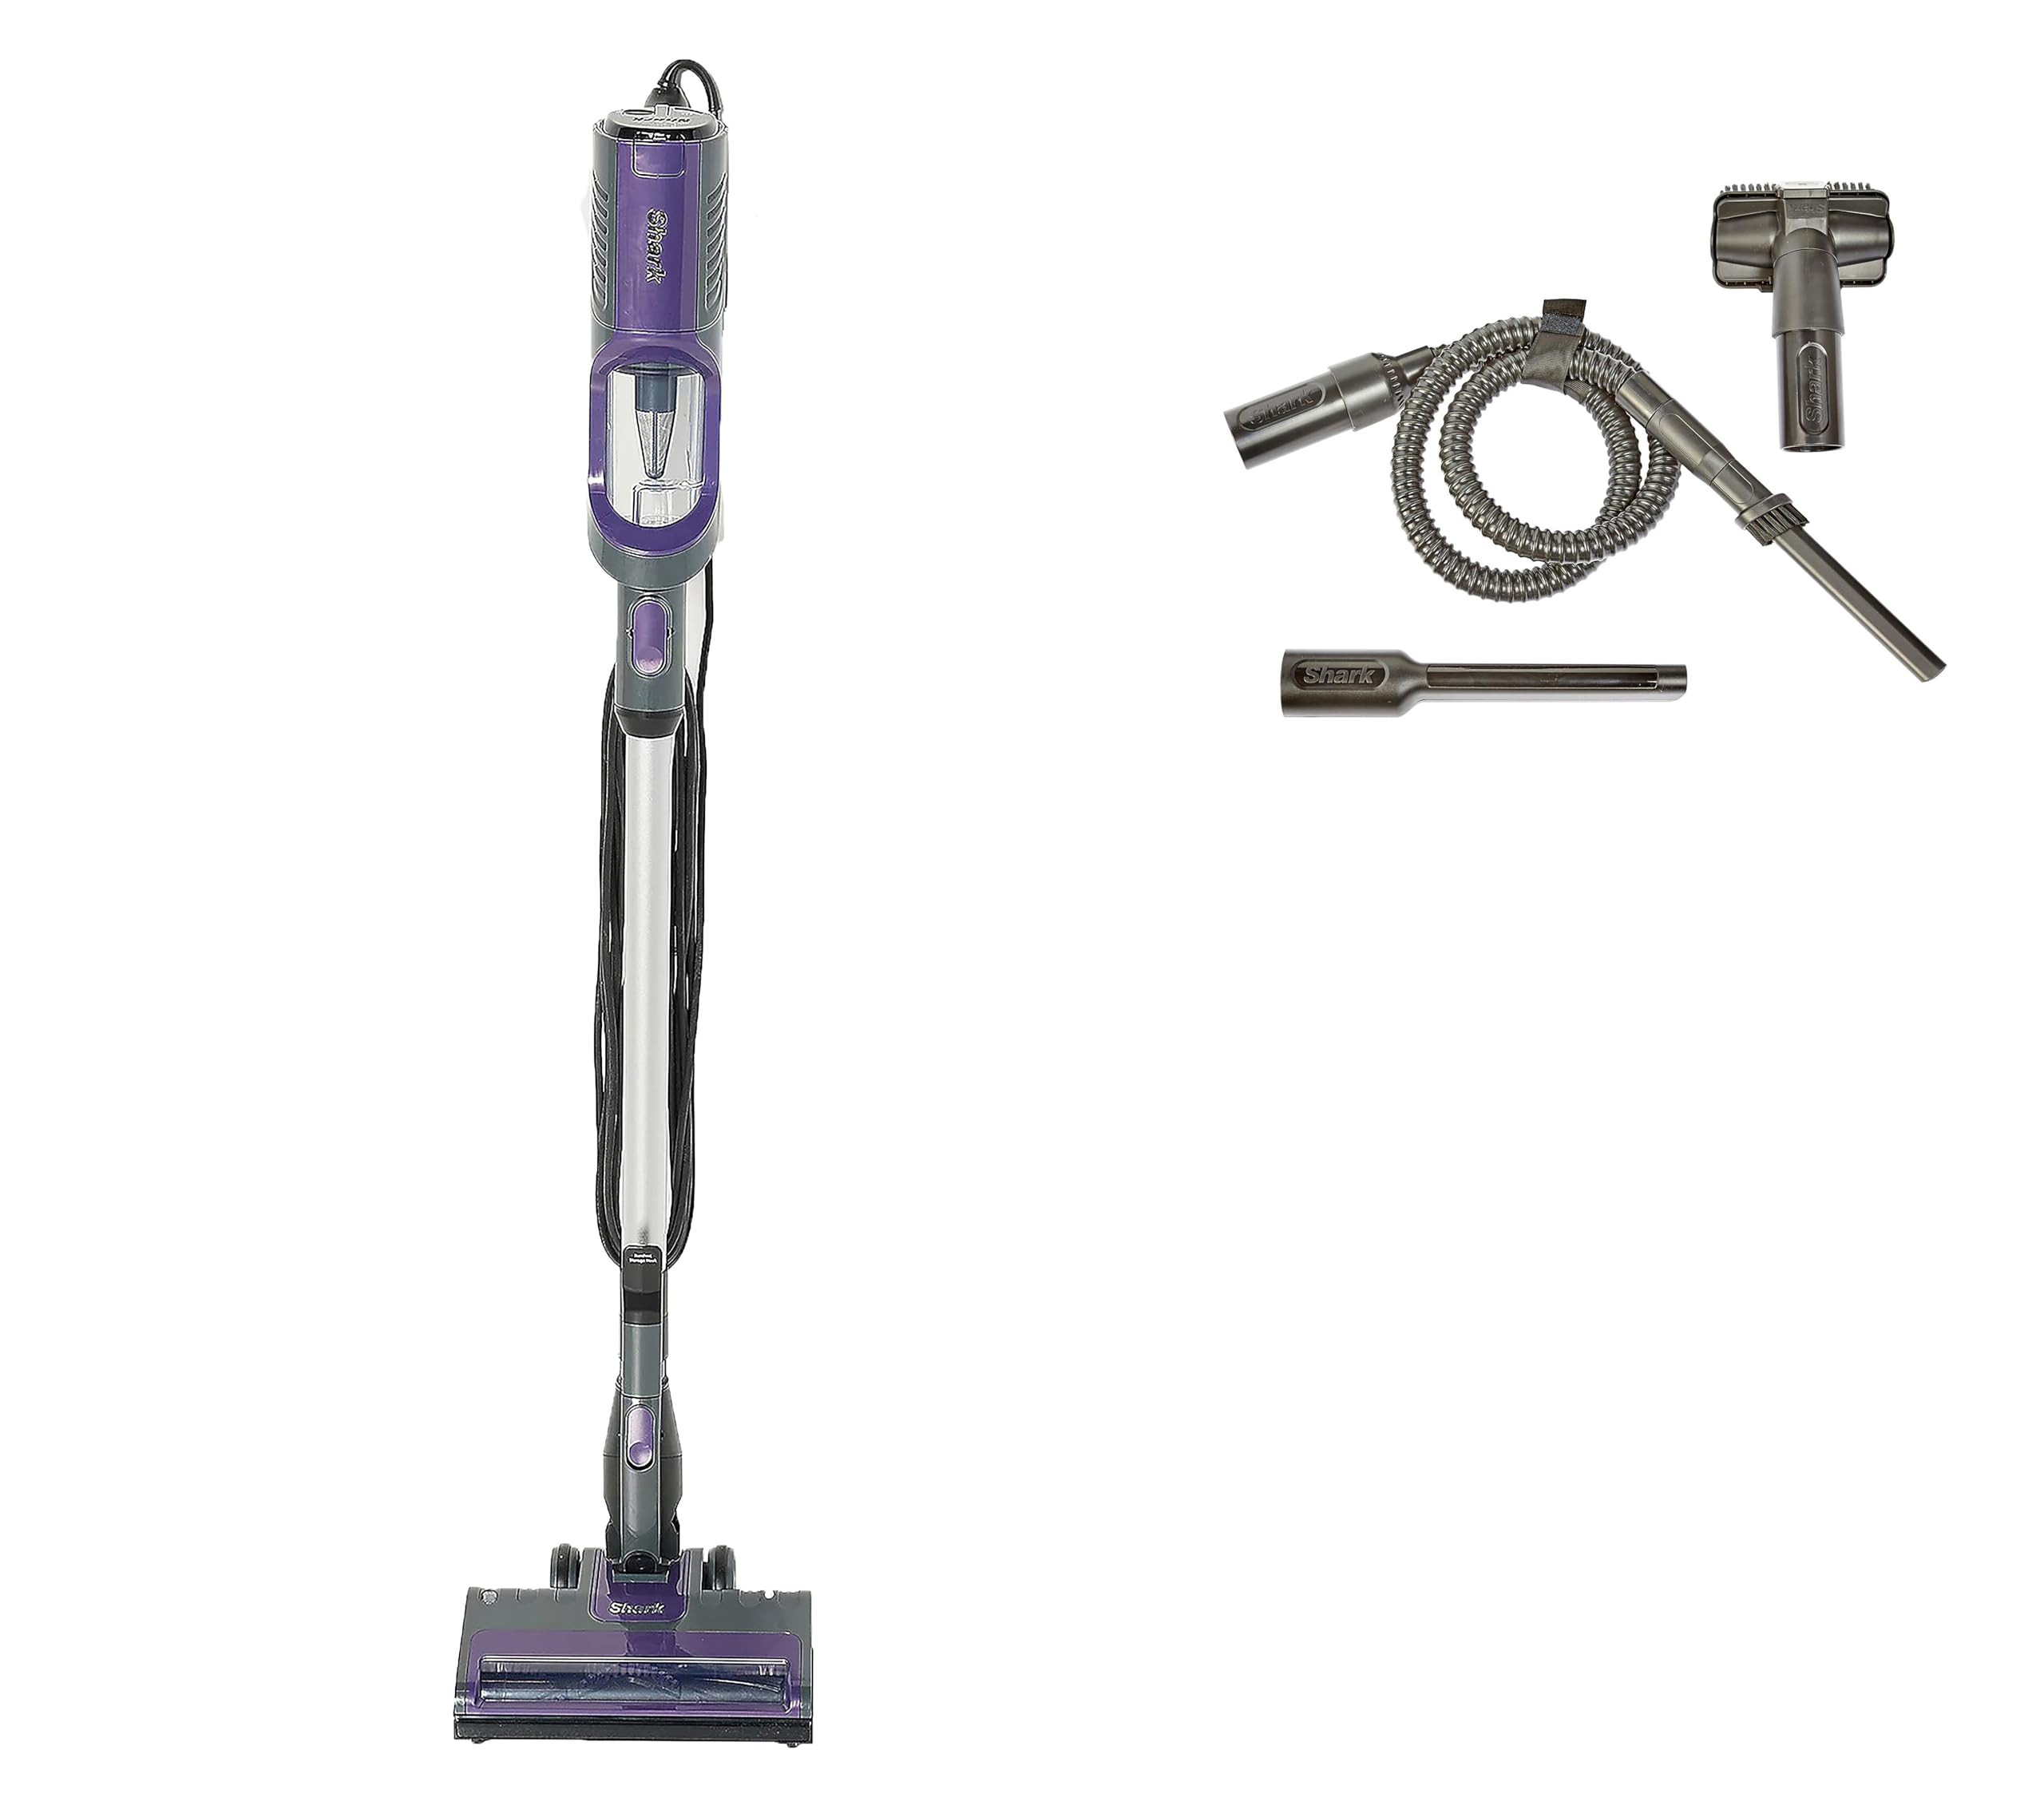 Shark QS101Q Ultralight HyperVelocity Corded Stick Vacuum, Converts to a Handheld Vacuum with Pet Multi-Tool, Crevice Tool, and Precision Duster, Purple (Renewed)